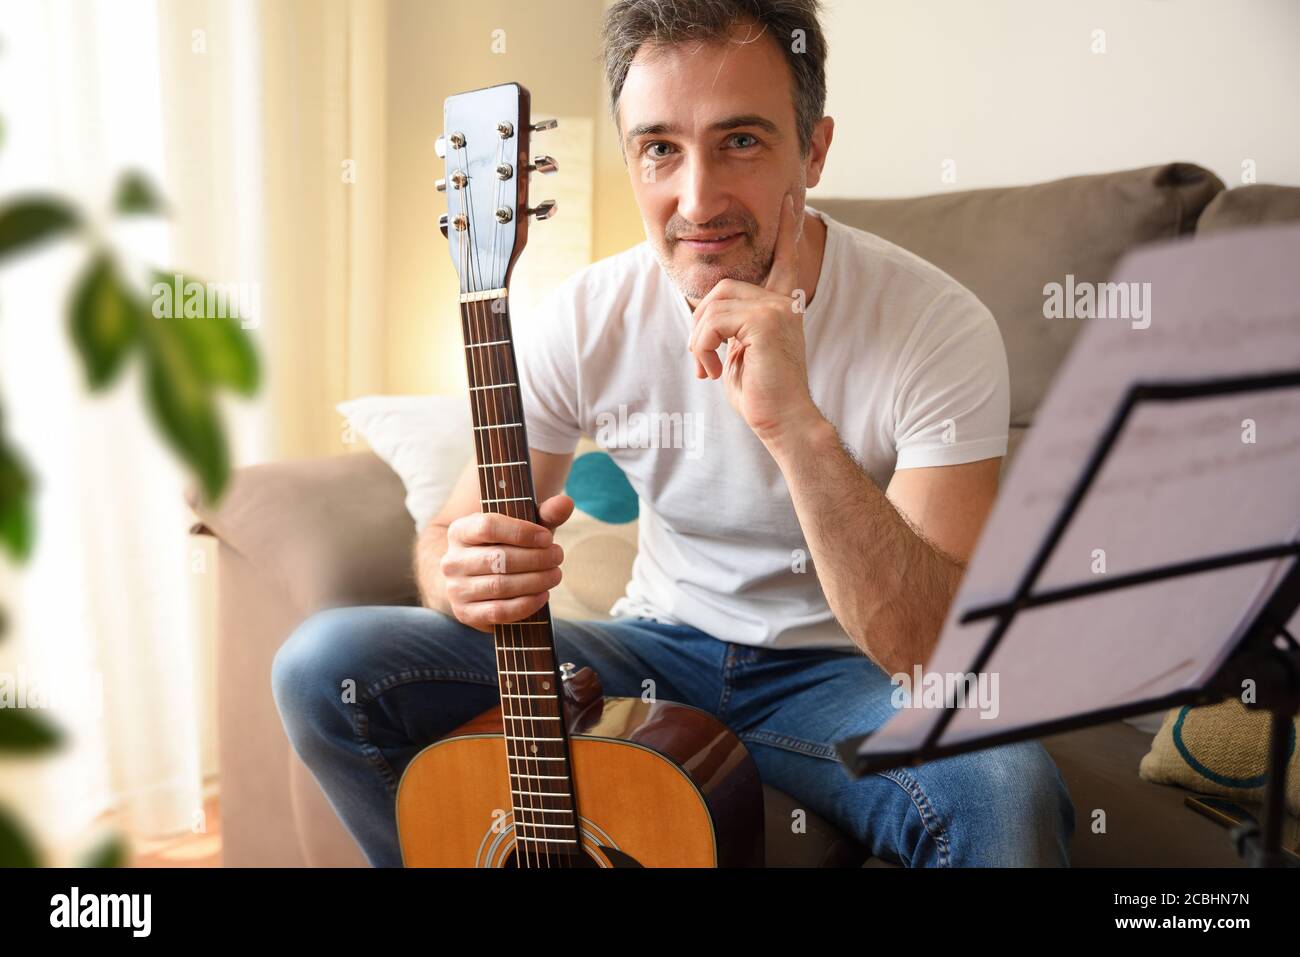 Smiling man with his acoustic guitar in hand looking straight ahead sitting on the sofa with music stand with songs at home Stock Photo